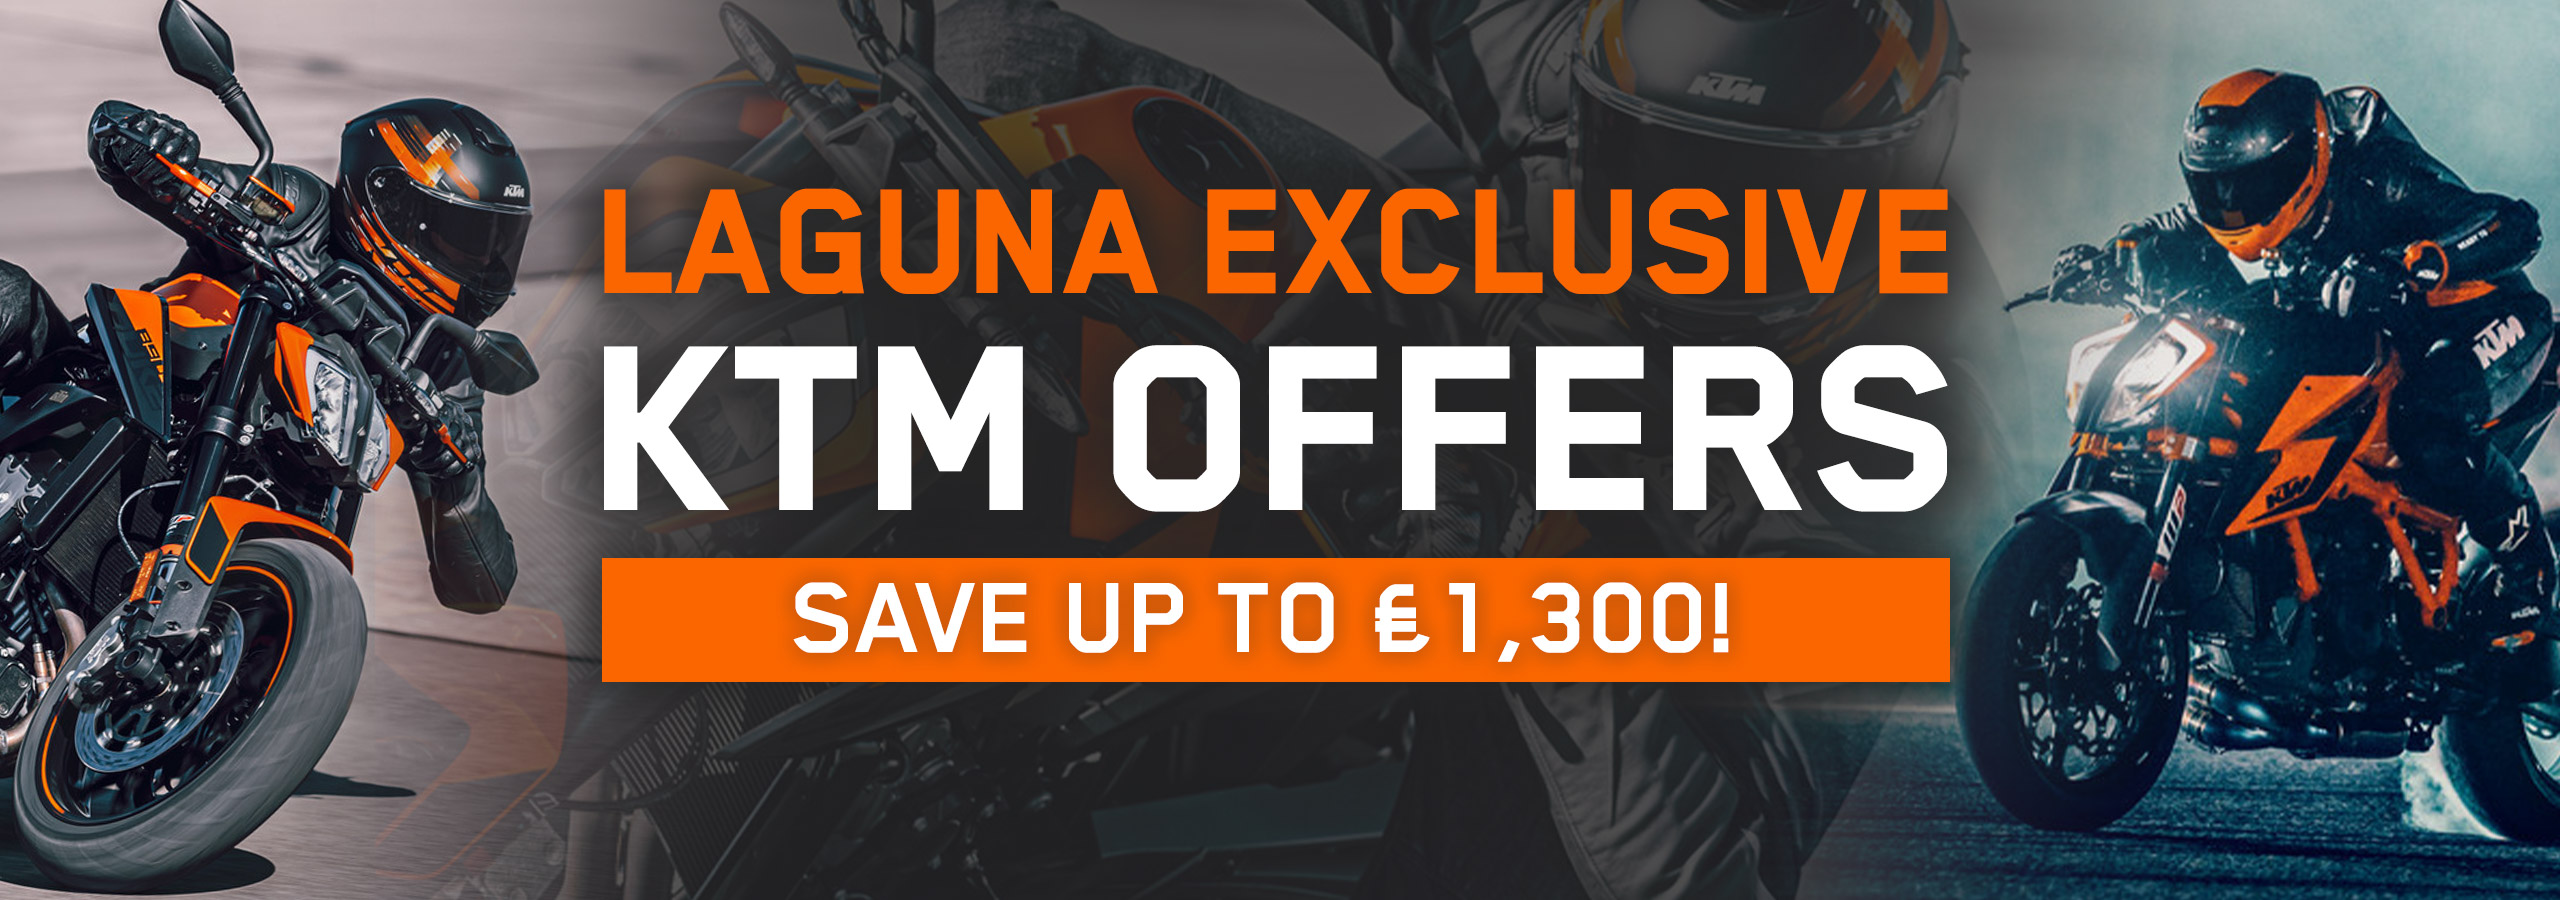 KTM exclusive offers available only at Laguna Motorcycles